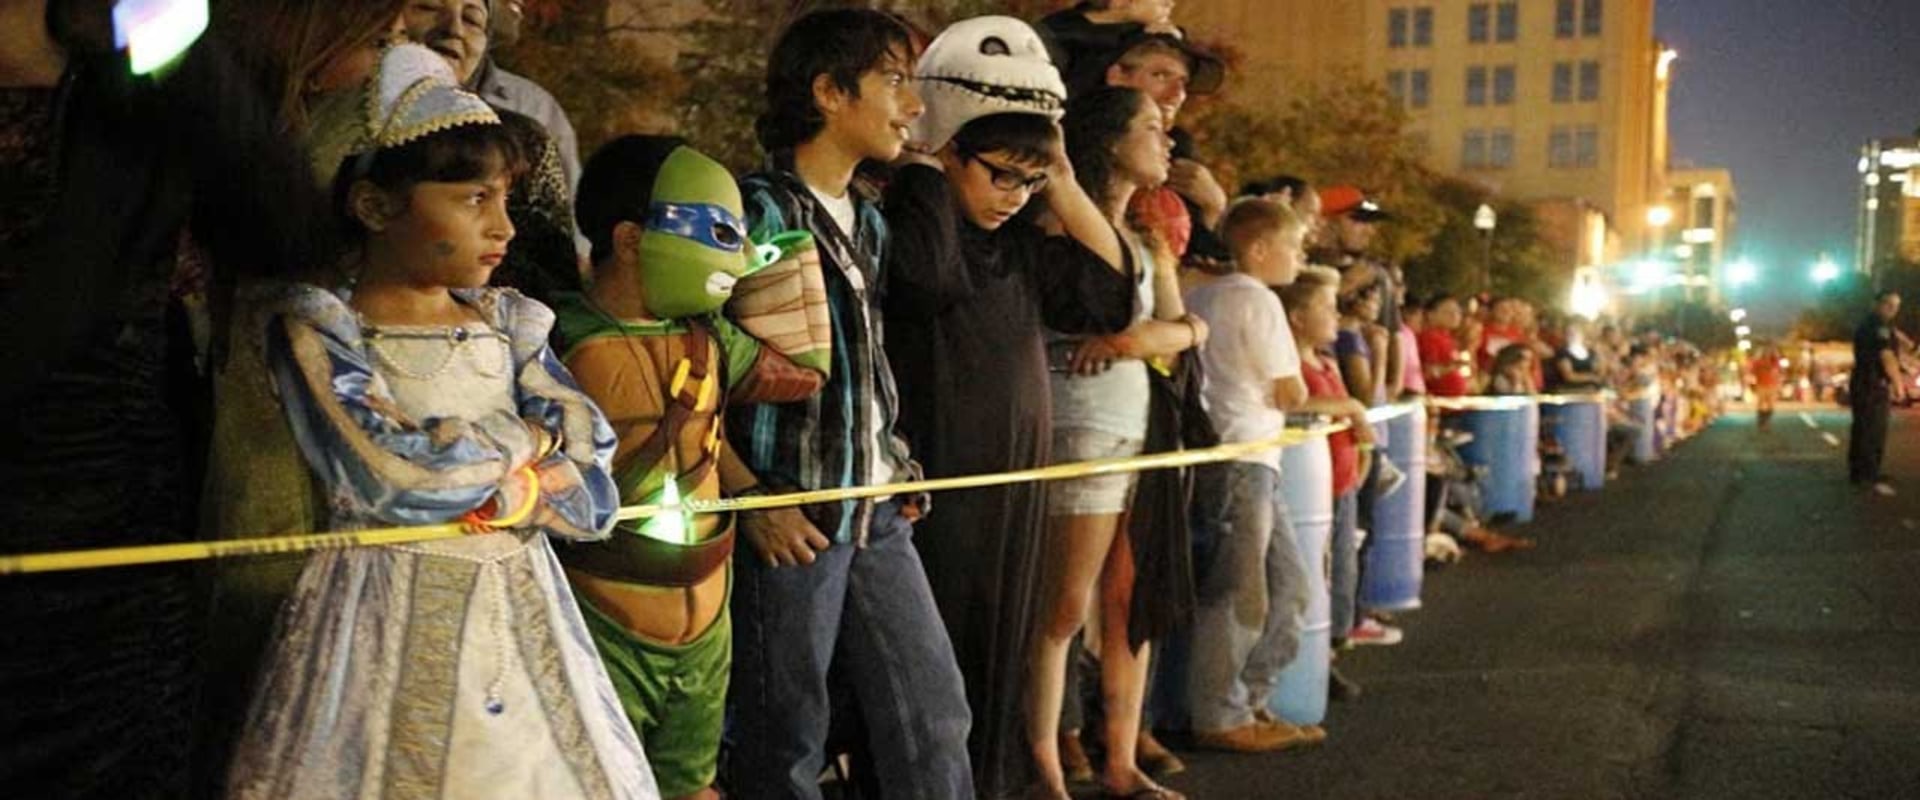 The Best Halloween Parades in Oklahoma City: A Guide for Spooky Fun